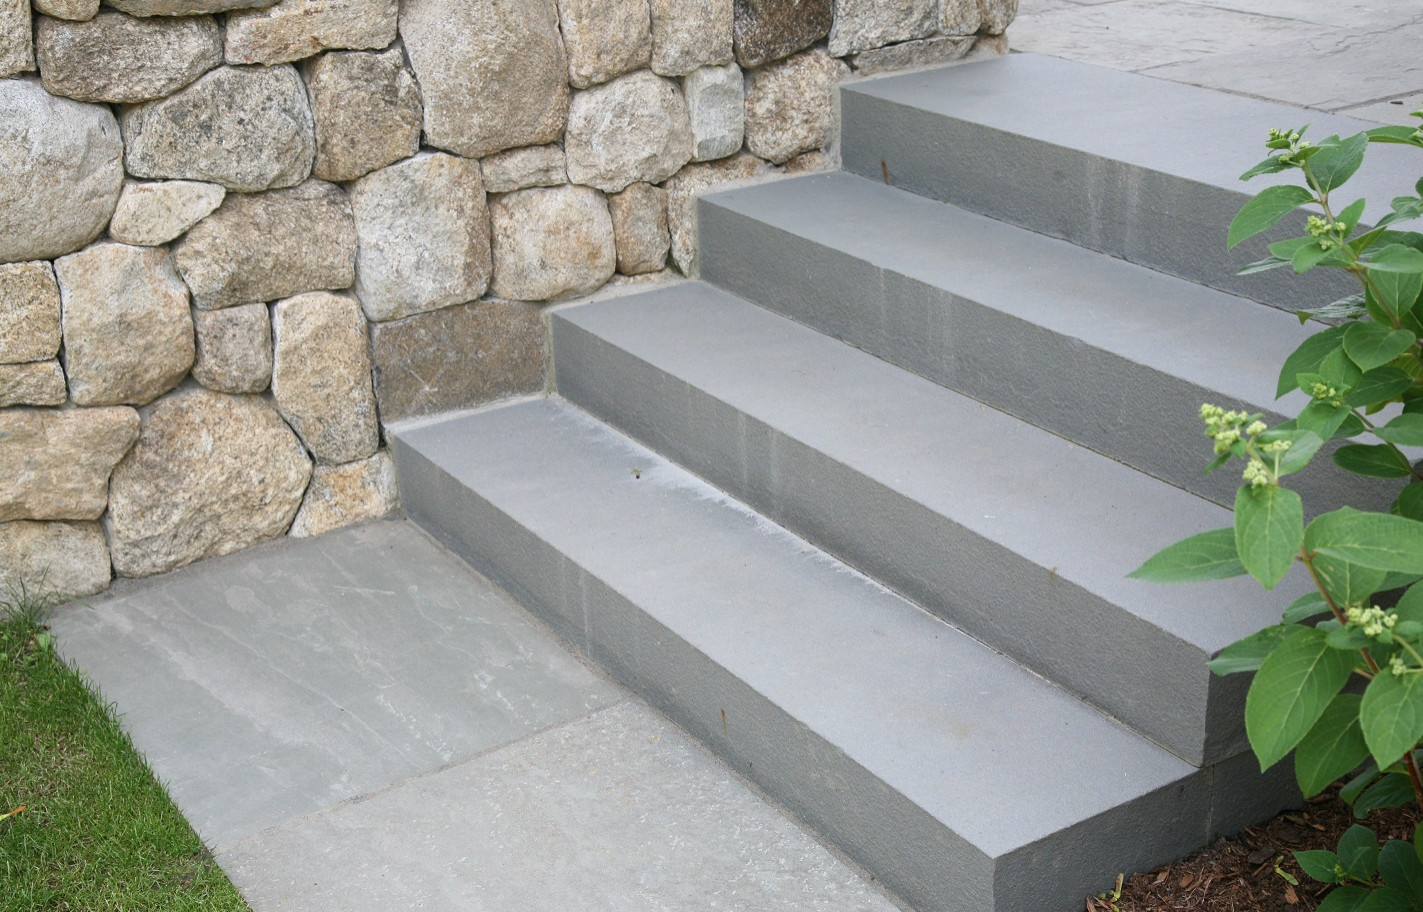 Enduring materials of solid bluestone steps and fieldstone foundation